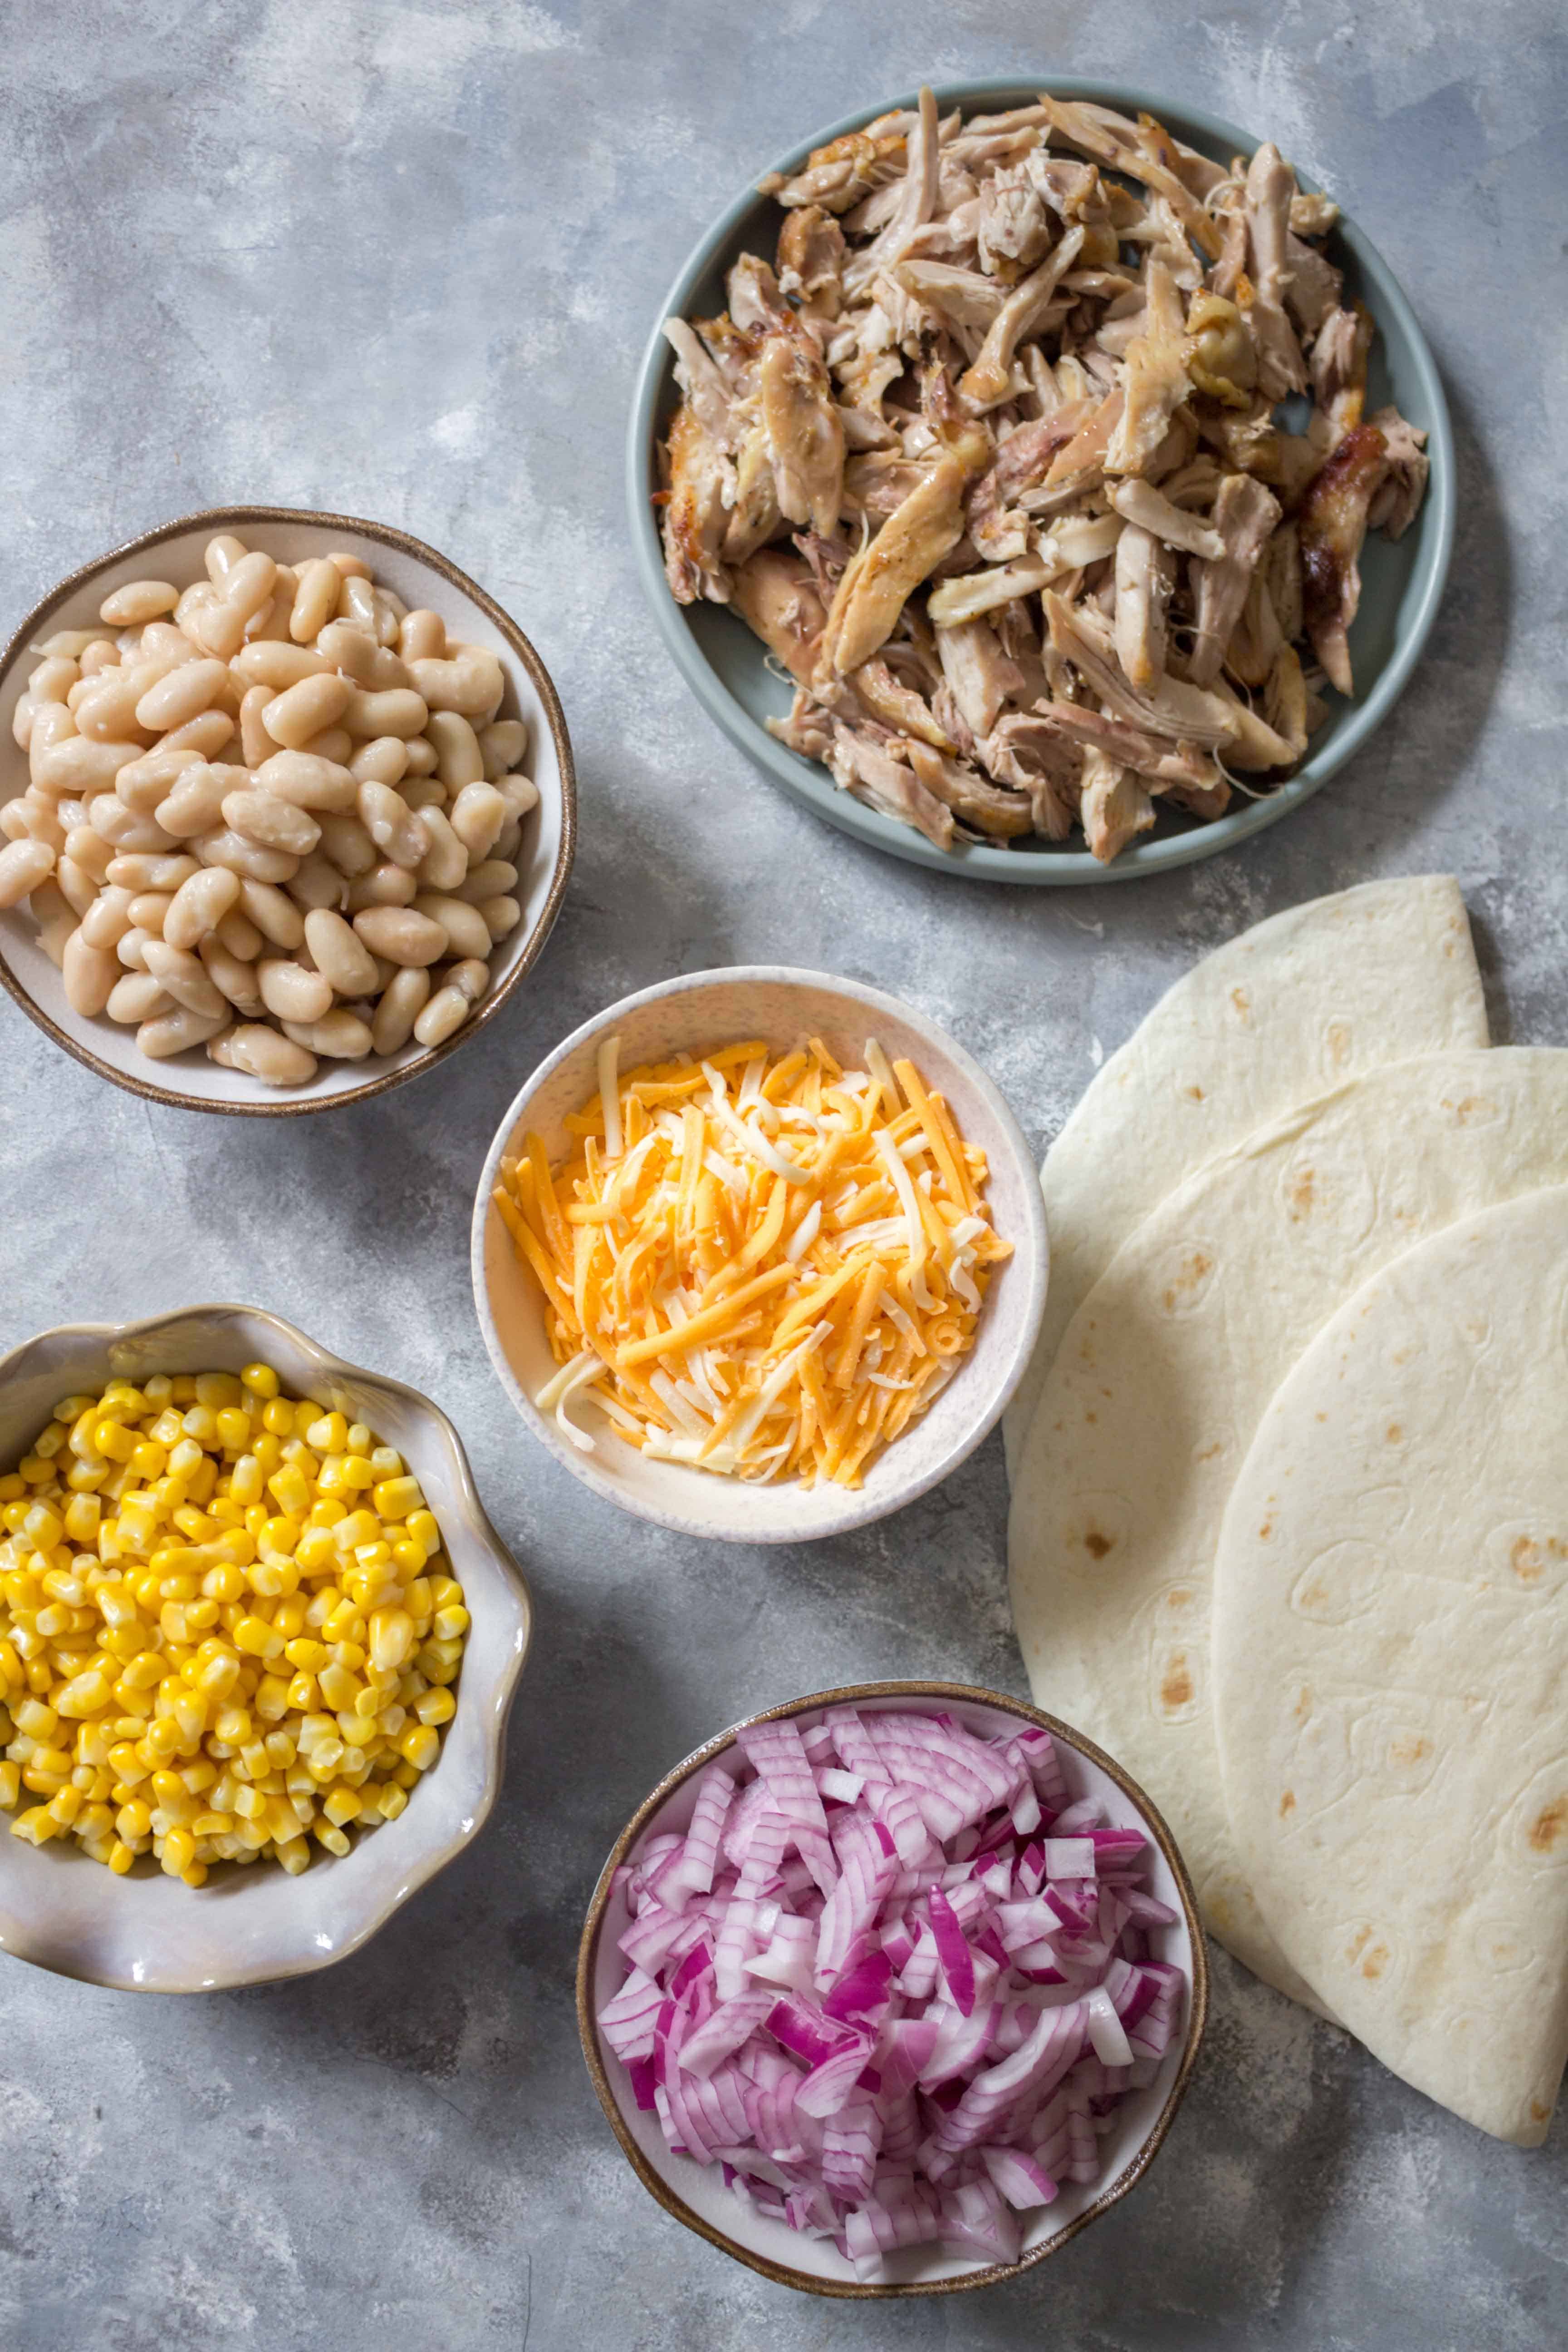 What'll you'll need to make meal prep freezer chicken burritos